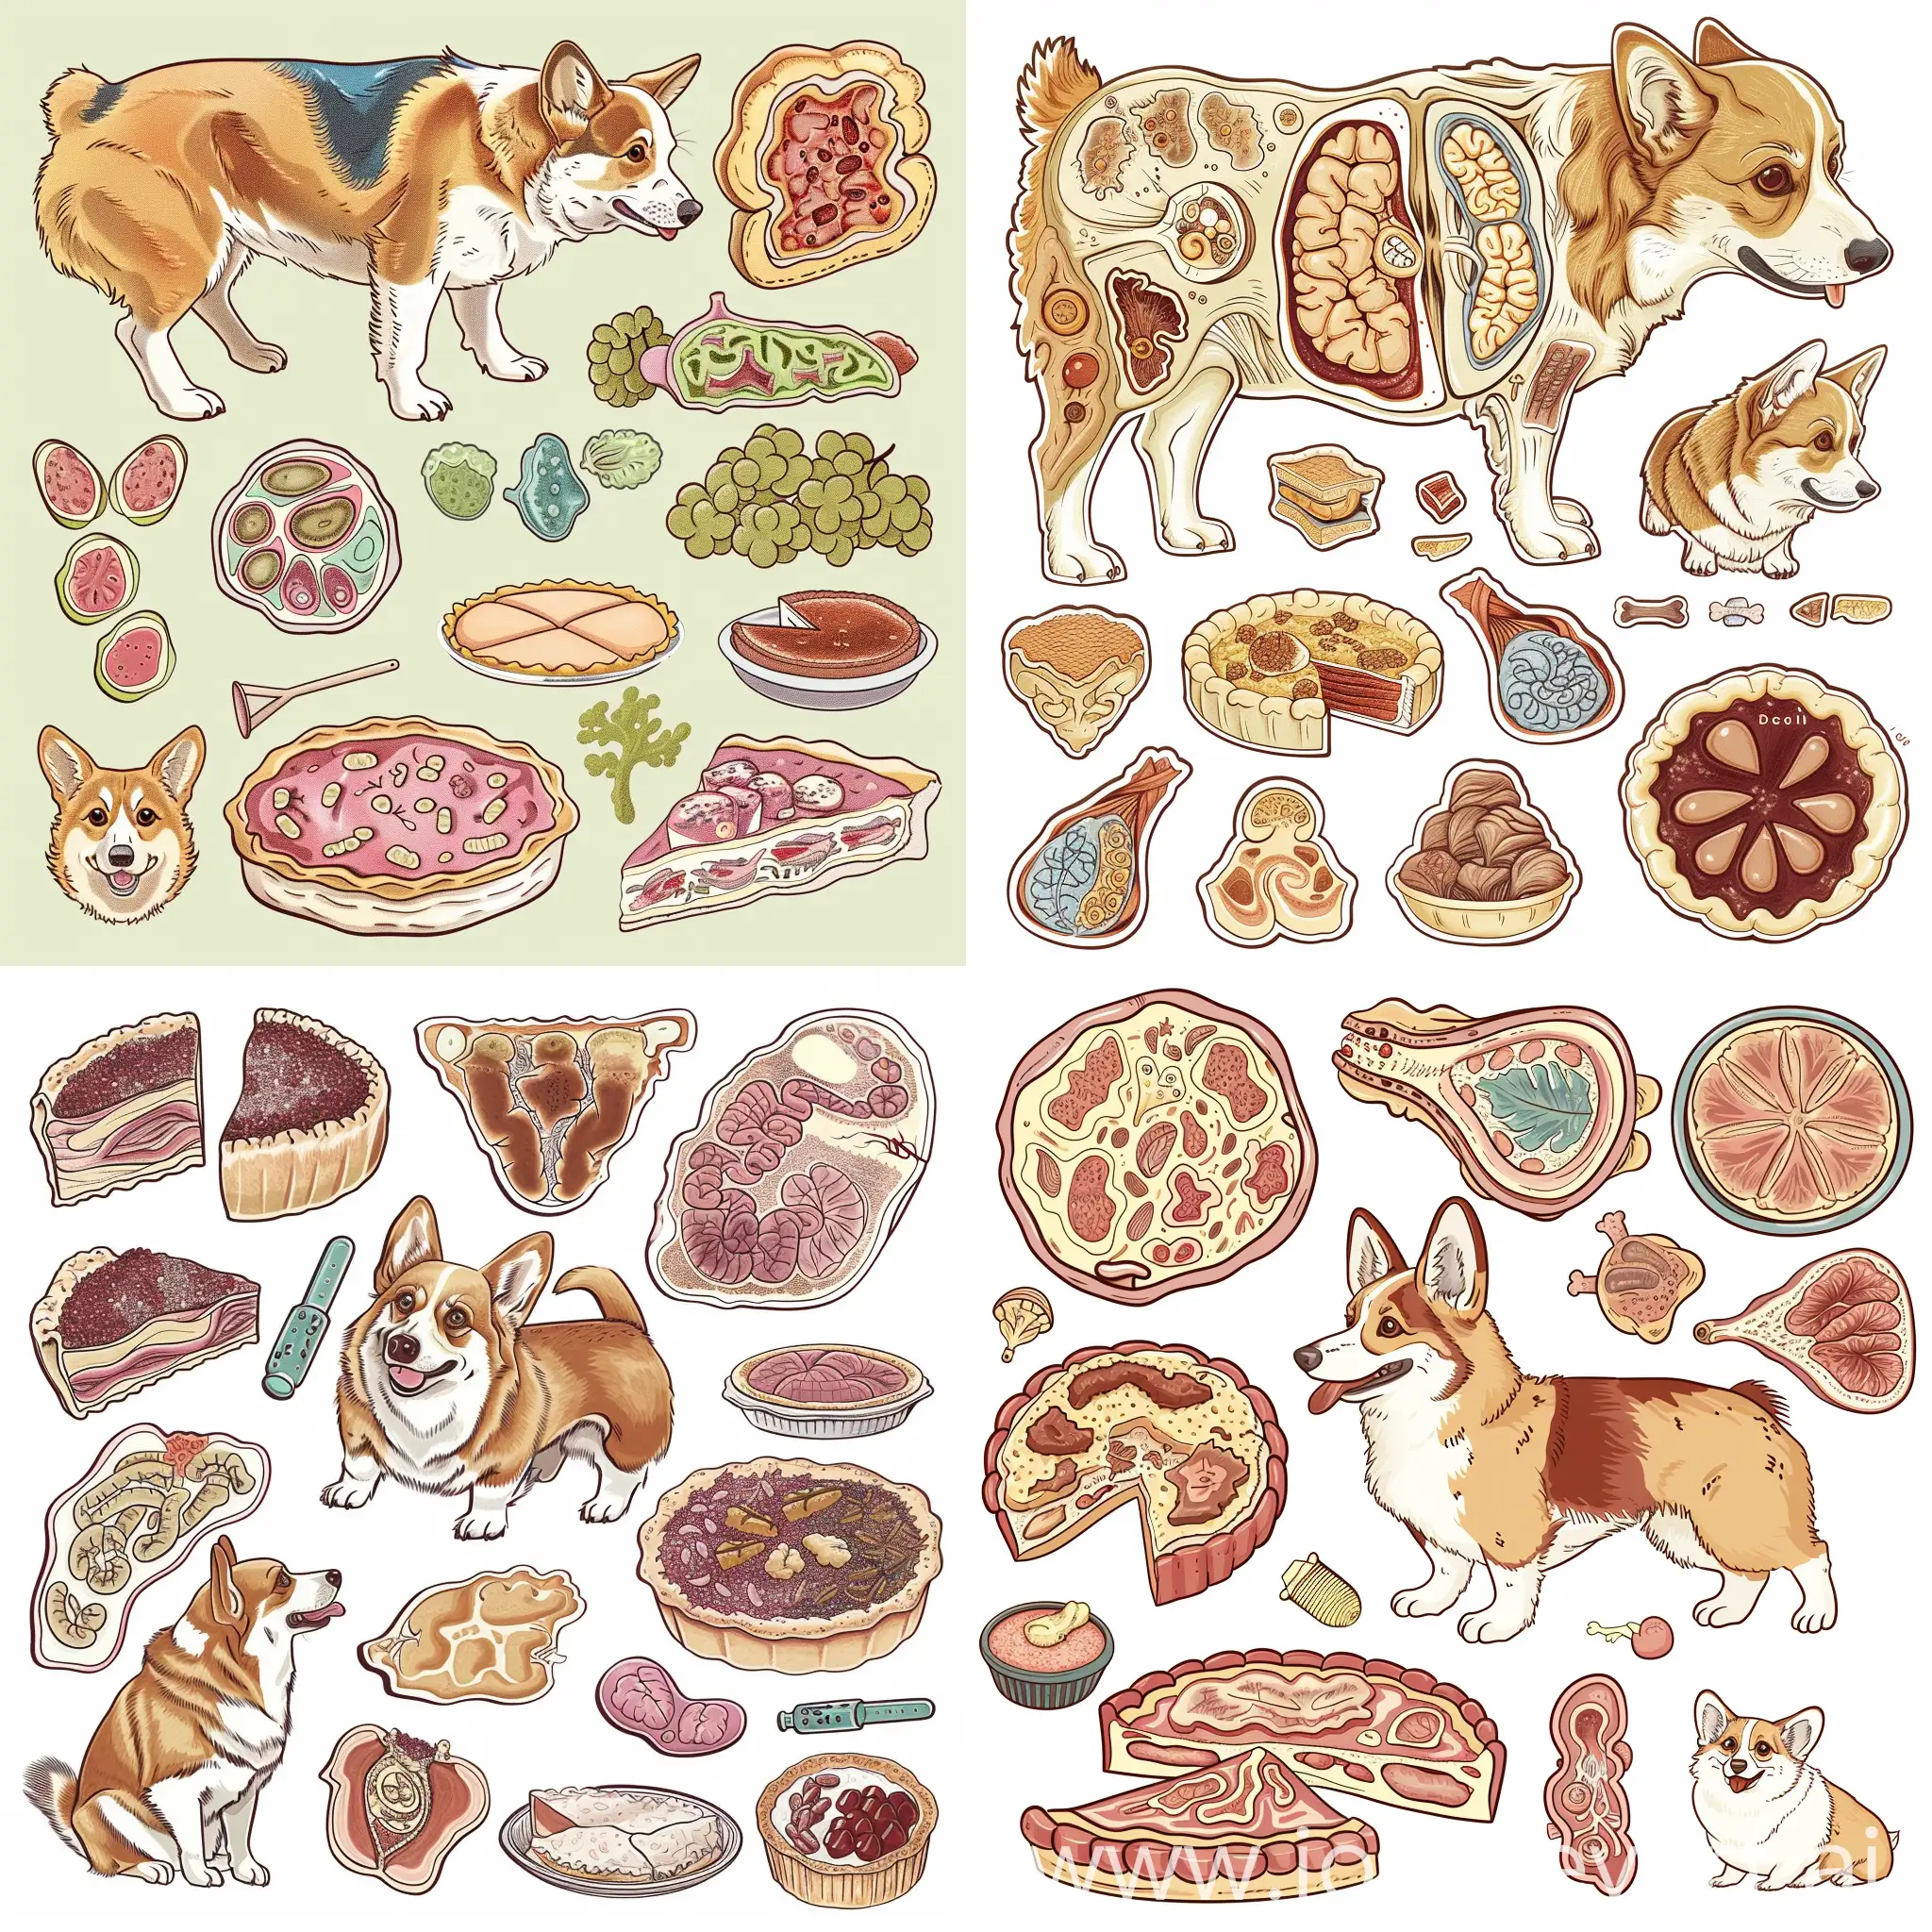 Histological-Sections-and-Corgi-Dog-in-Pleasant-Tones